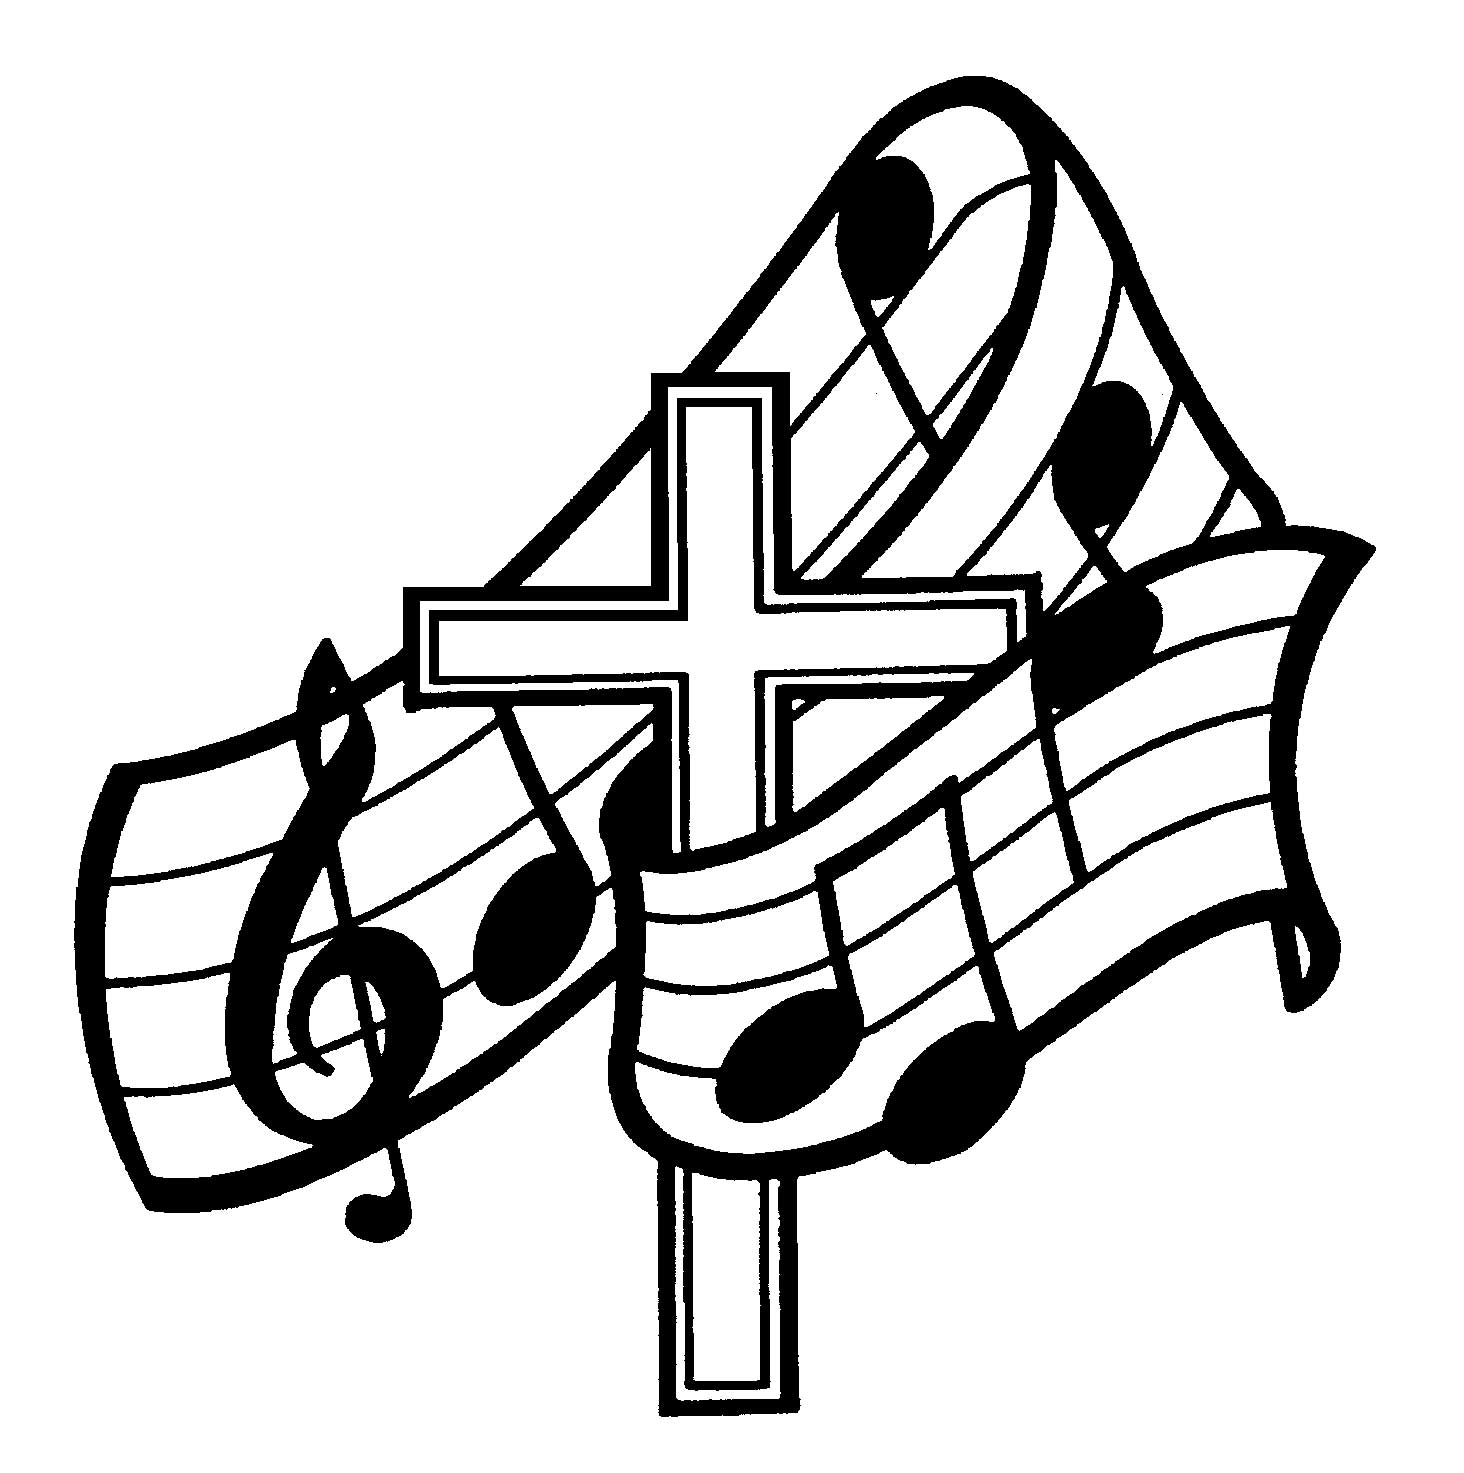 Music Ministry – Our Lady of Grace Catholic Church